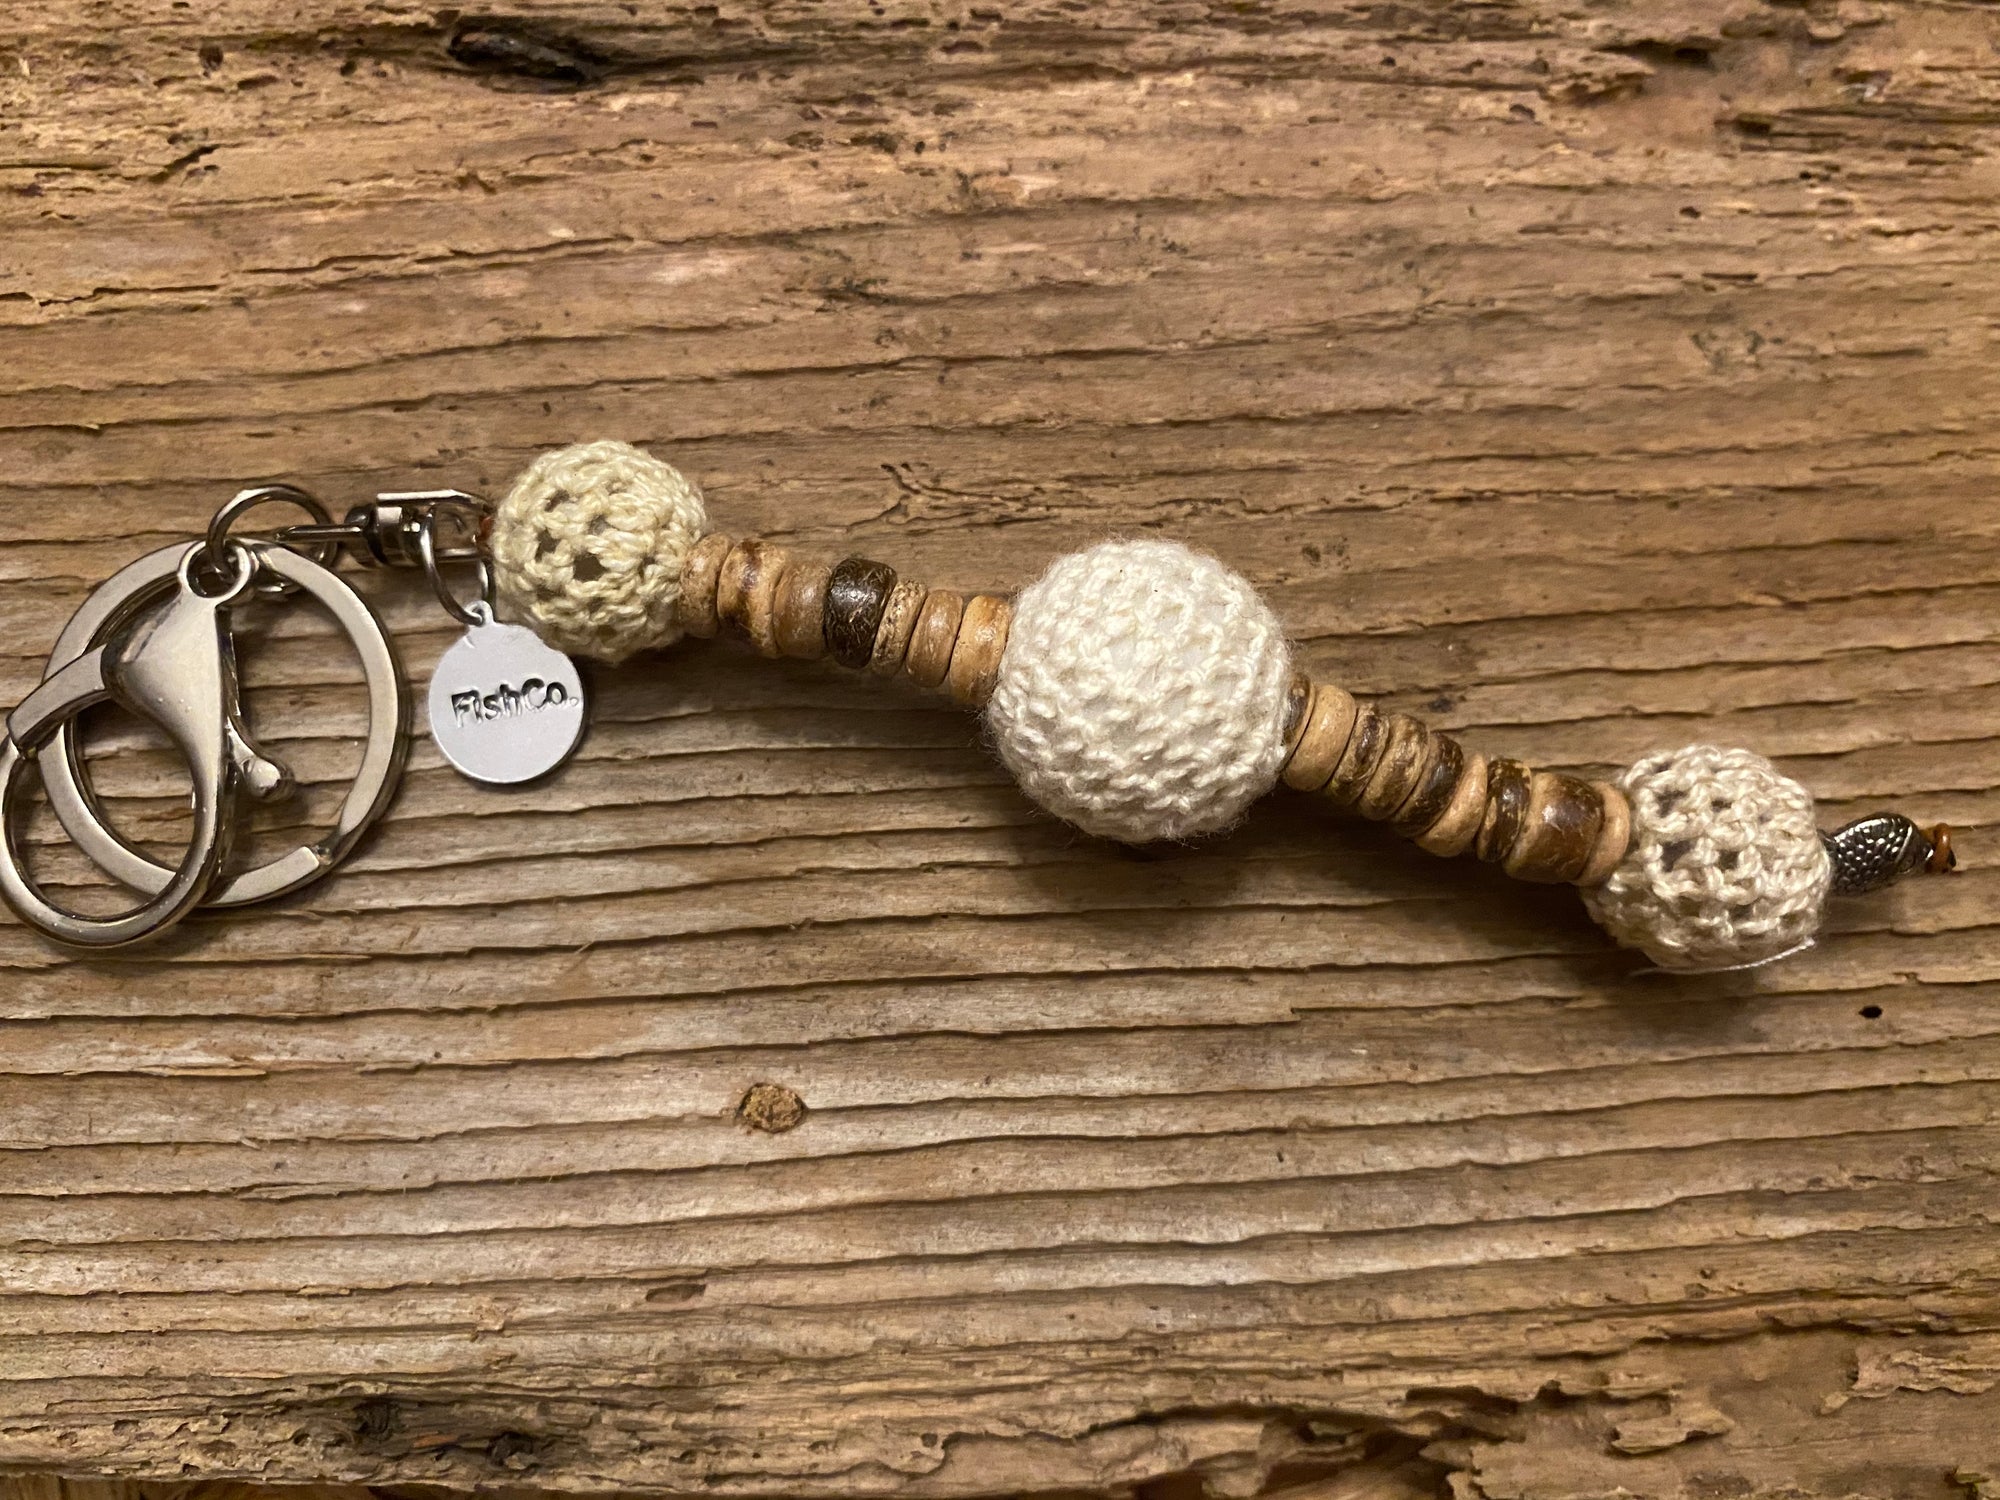 Shanga Keychain oatmeal and cream macramé beads with coconut shell disc accents